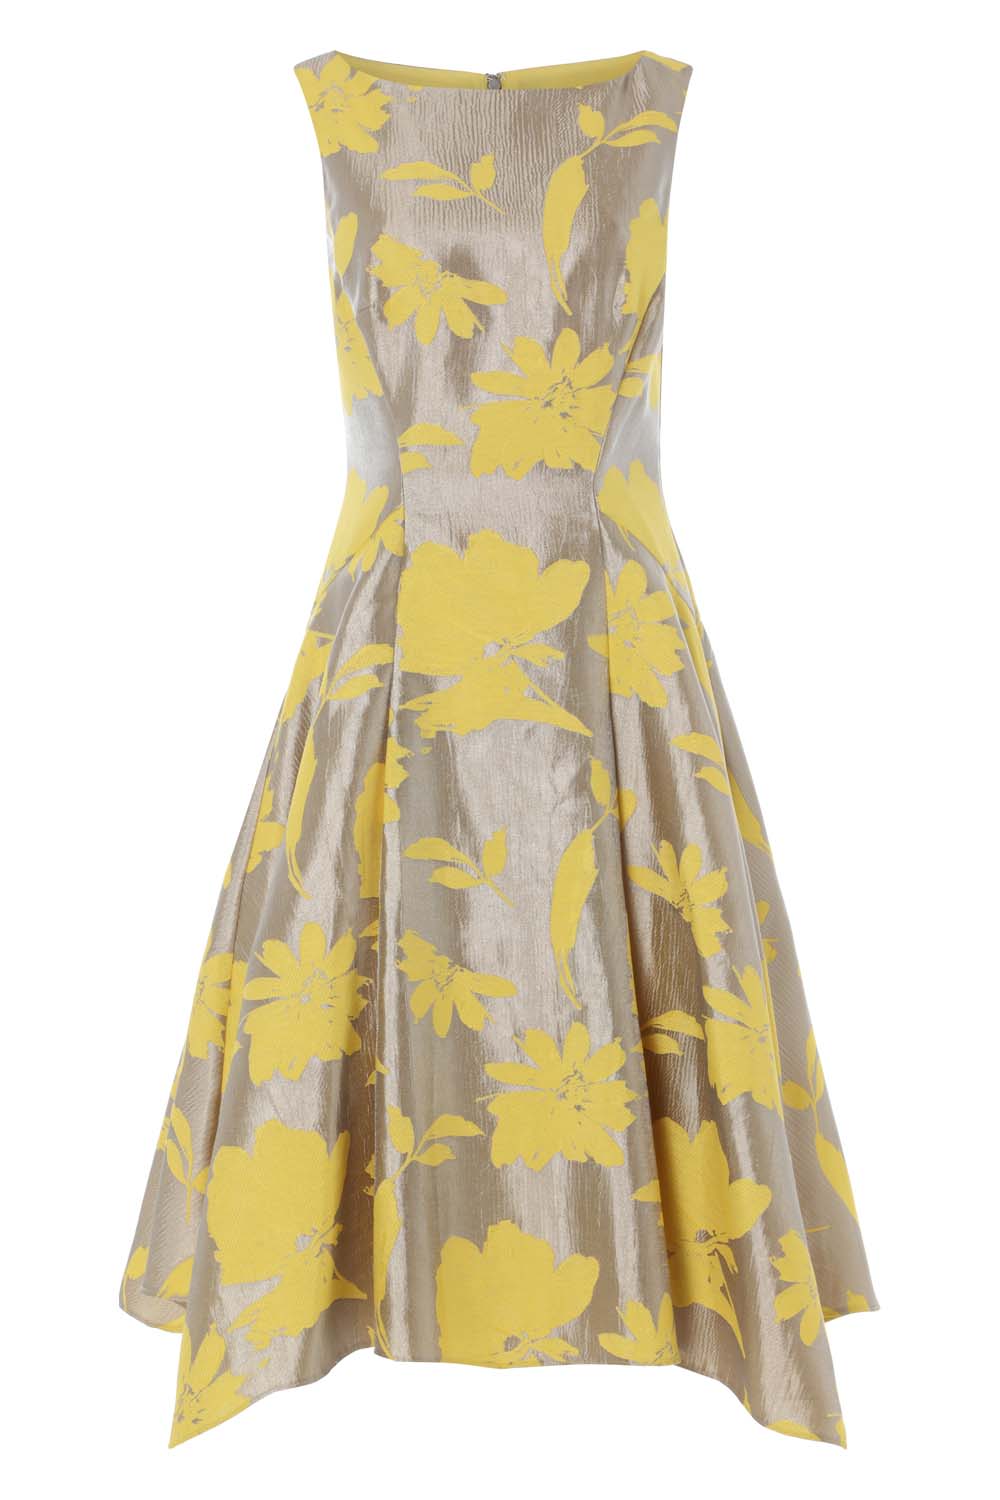 Yellow Floral Jacquard Fit and Flare Midi Dress, Image 5 of 5